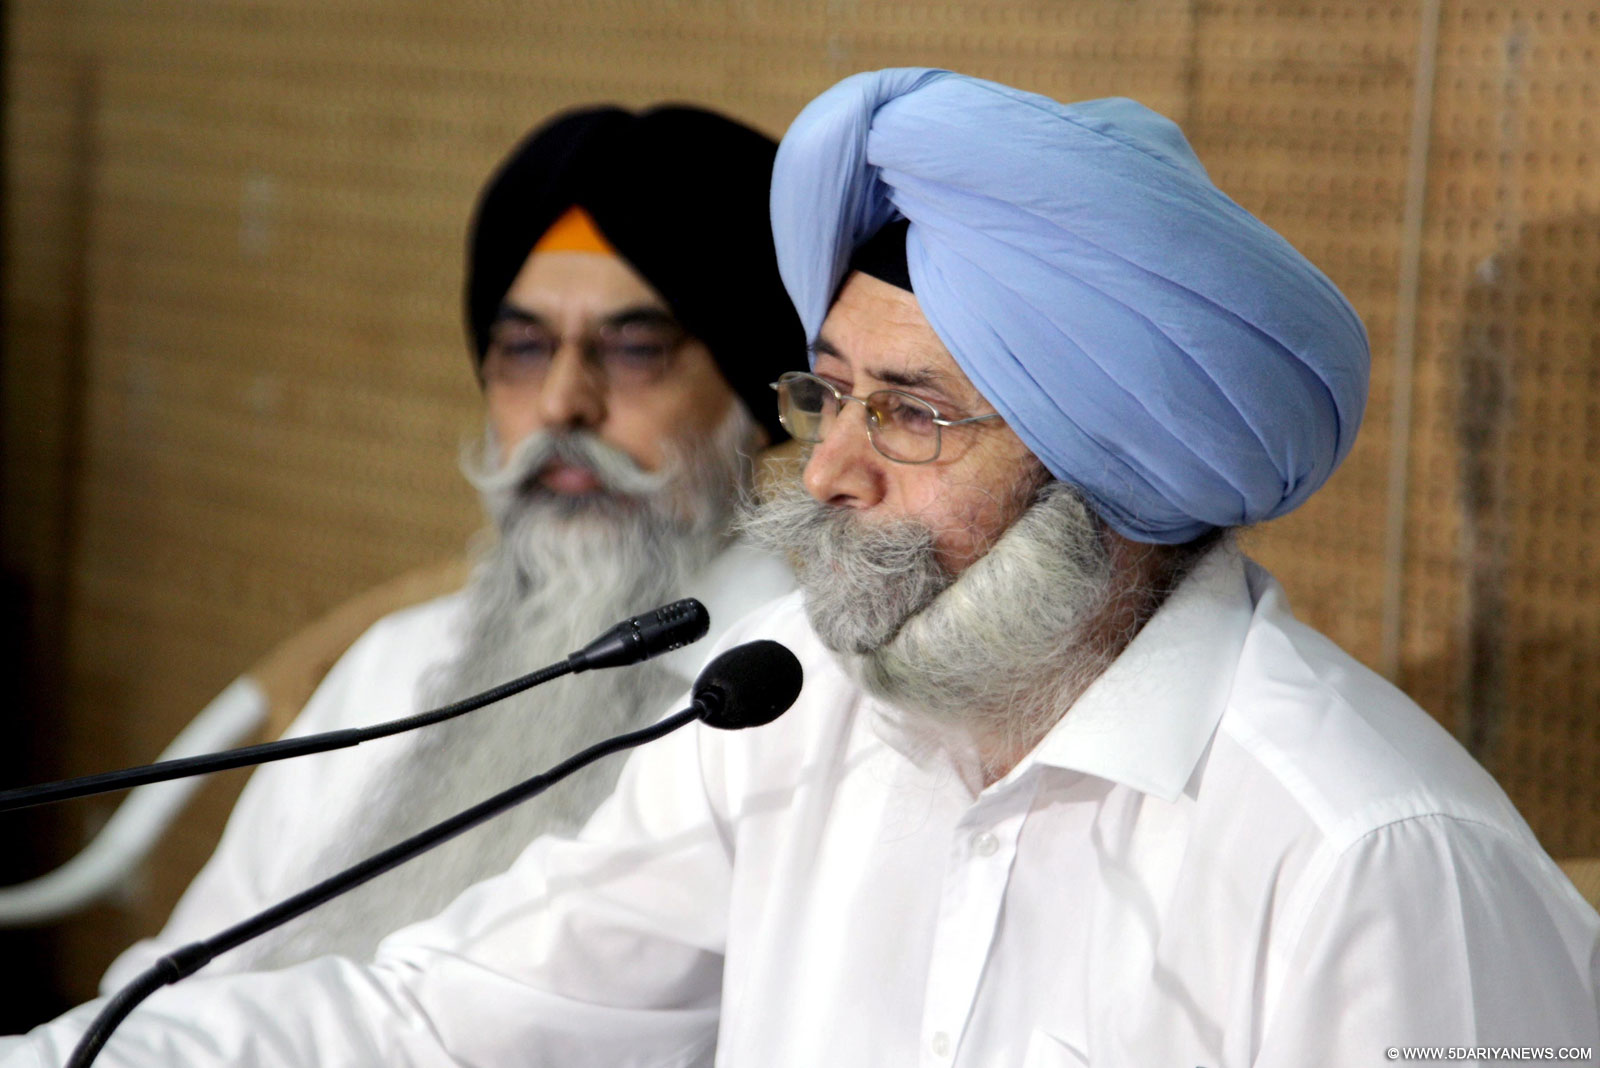 Senior advocate H S Phoolka addresses a press conference to announce his resignation from Aam Aadmi Party (AAP) post to focus on 1984 riots cases in Chandigarh on Sep 19, 2015.